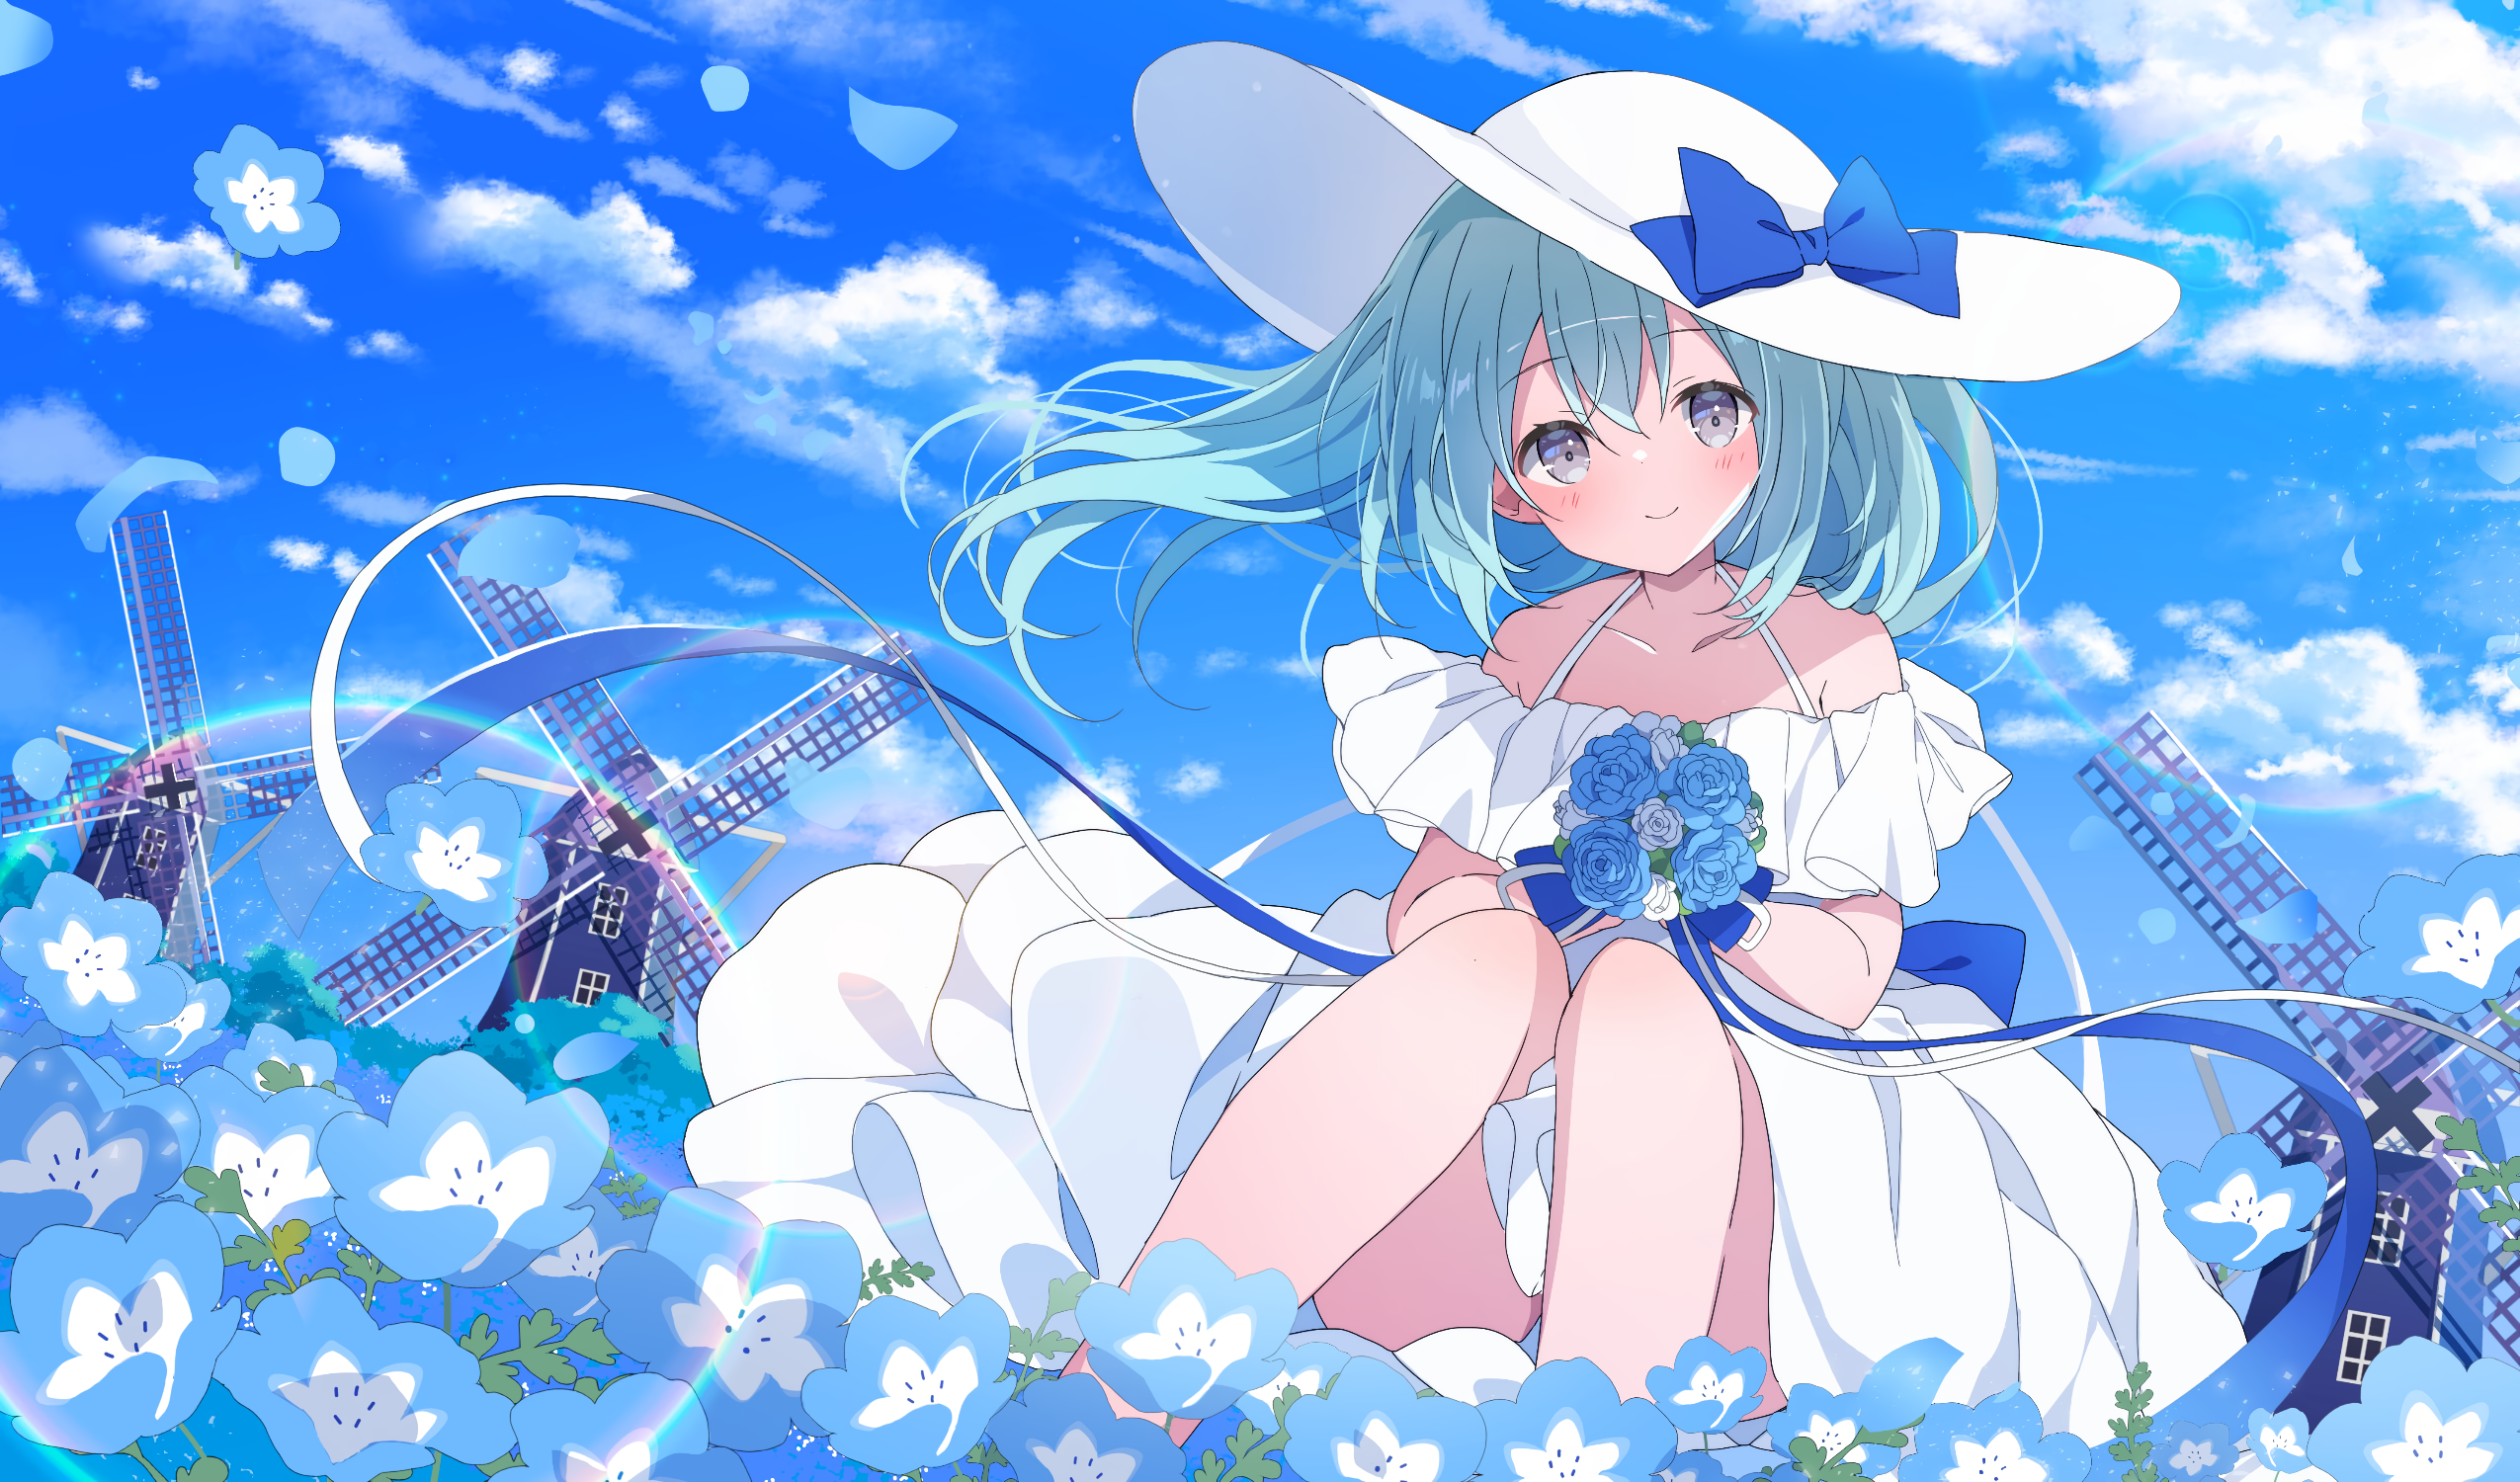 Anime Anime Girls Hat Smiling Blushing Looking At Viewer Flowers Clouds Sky Dress Windmill Petals 2550x1500